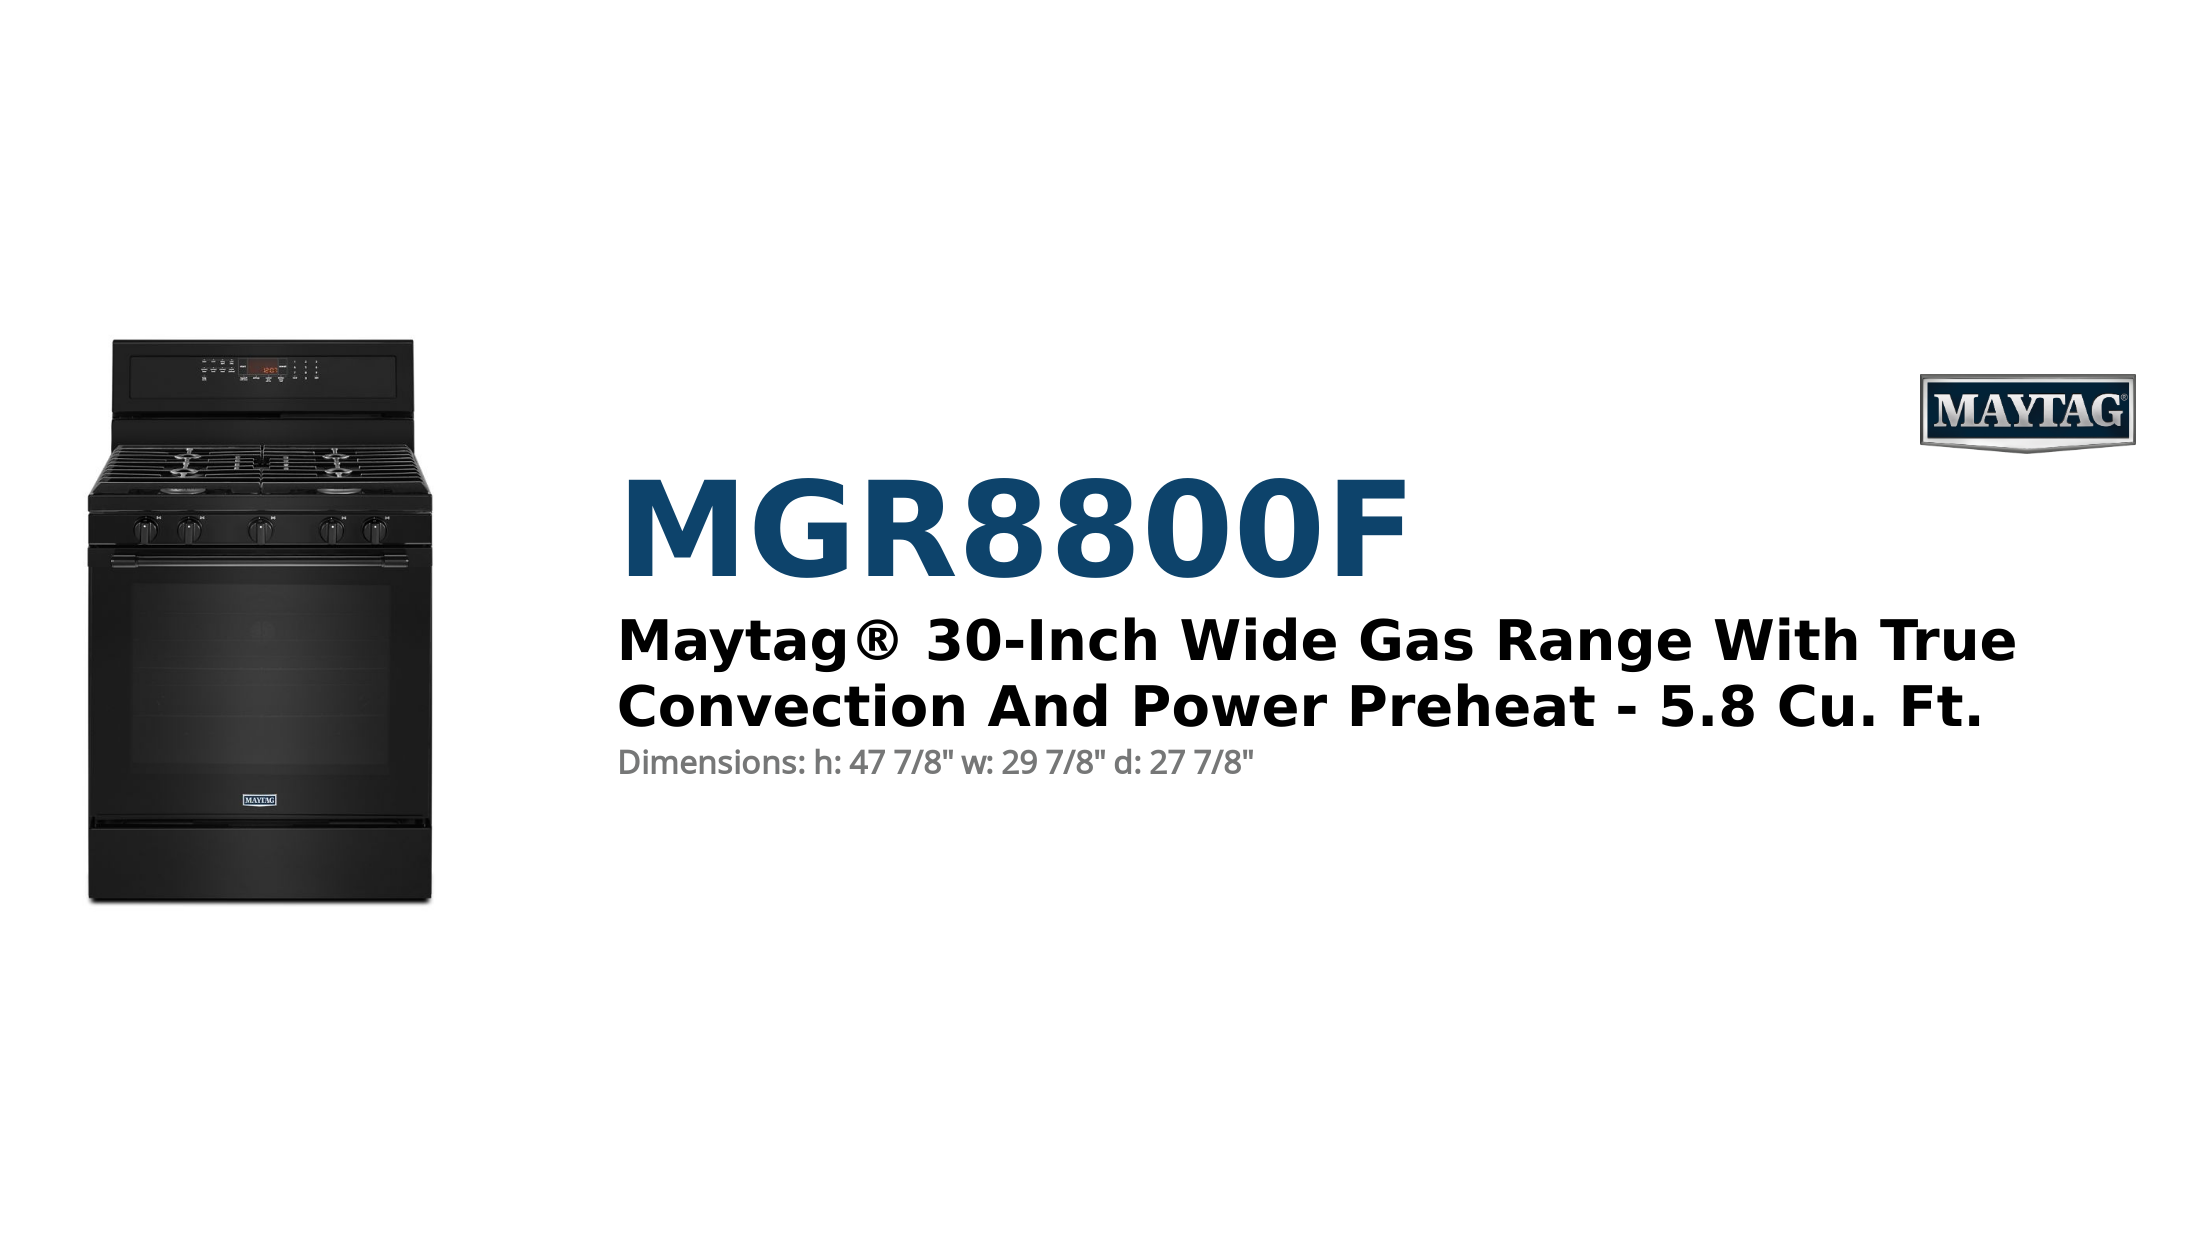 Maytag® 30-Inch Wide Gas Range With True Convection And Power Preheat - 5.8 Cu. Ft.